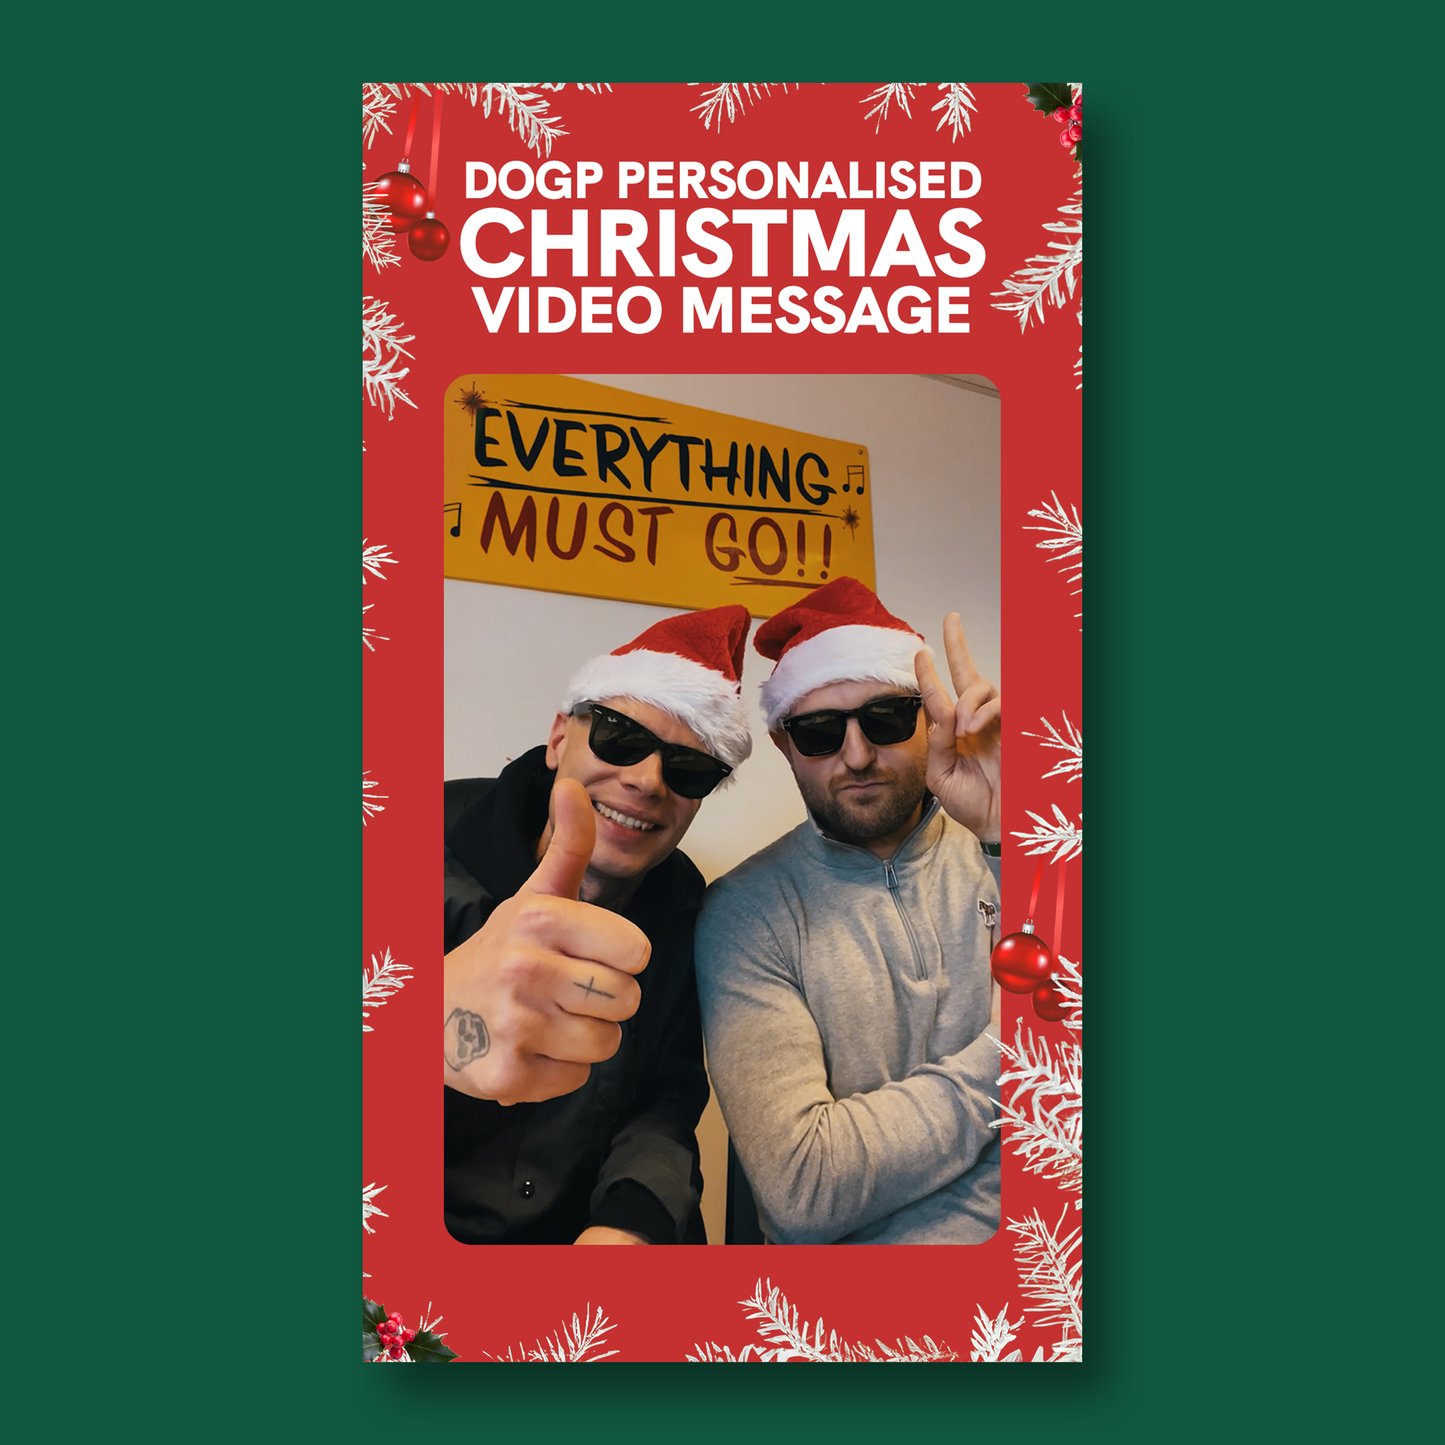 DOGP PERSONALISED CHRISTMAS VIDEO MESSAGE